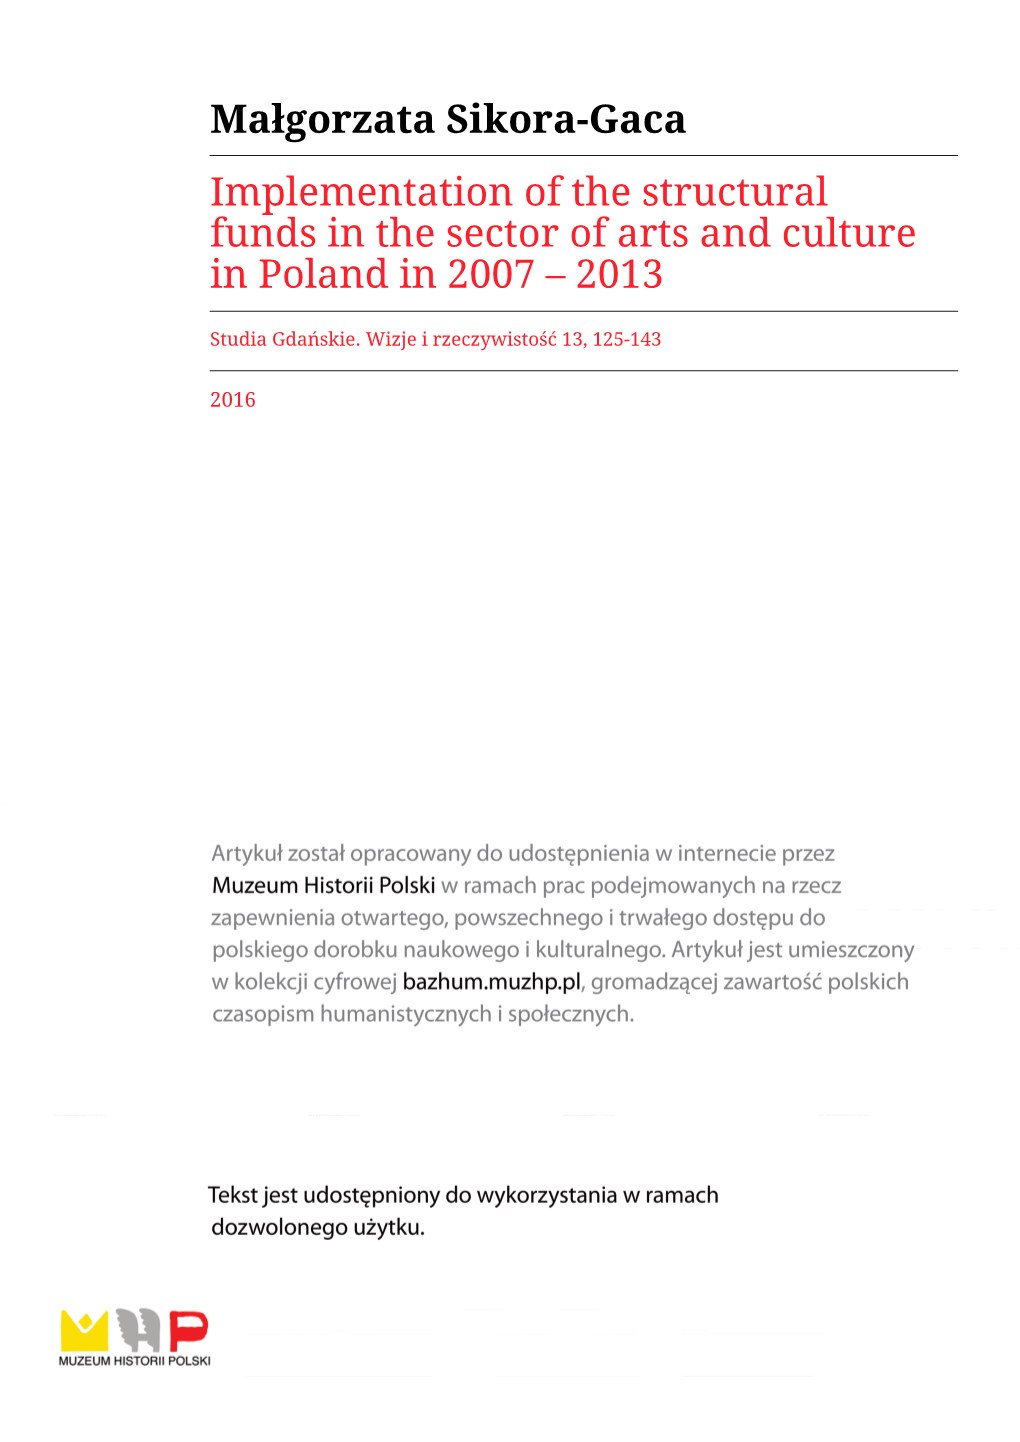 Małgorzata Sikora-Gaca Implementation of the Structural Funds in the Sector of Arts and Culture in Poland in 2007 – 2013